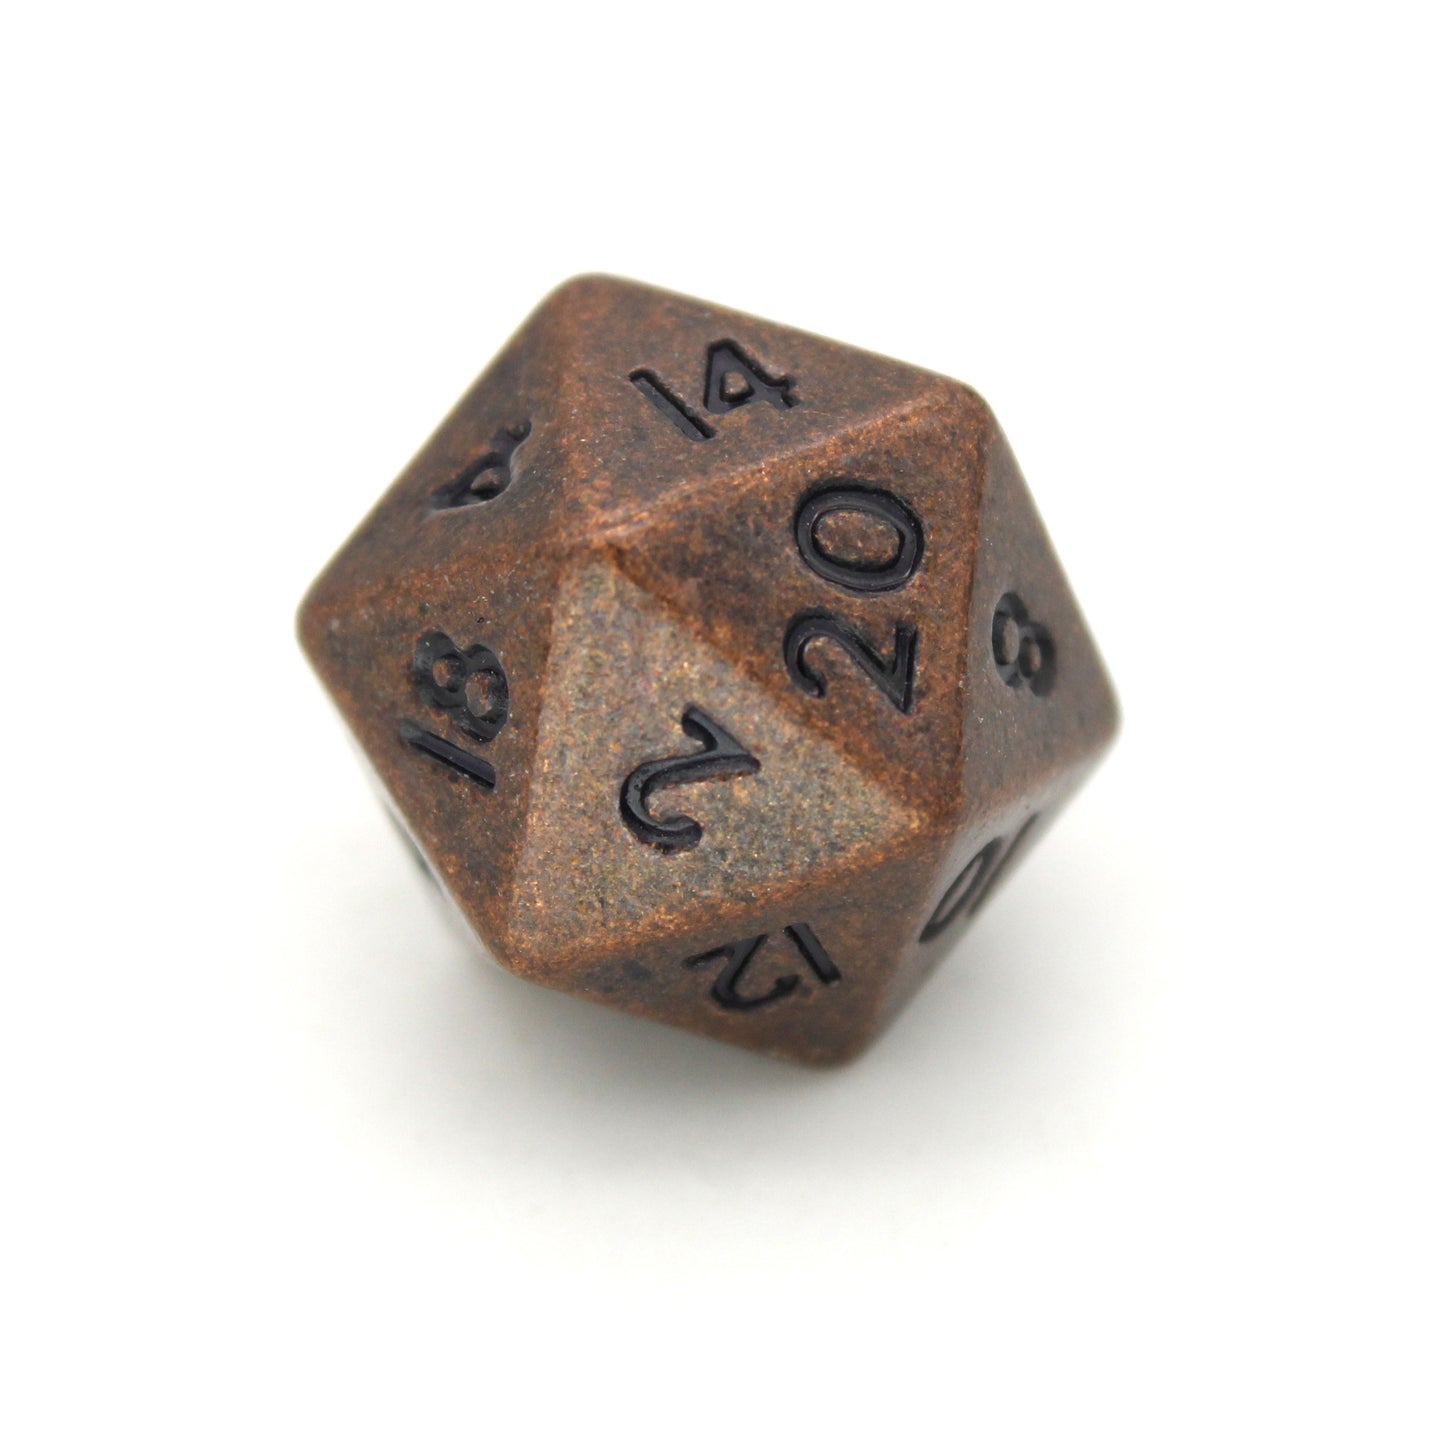 Urchins is a 7-piece set of ancient copper colored 10mm metal dice.